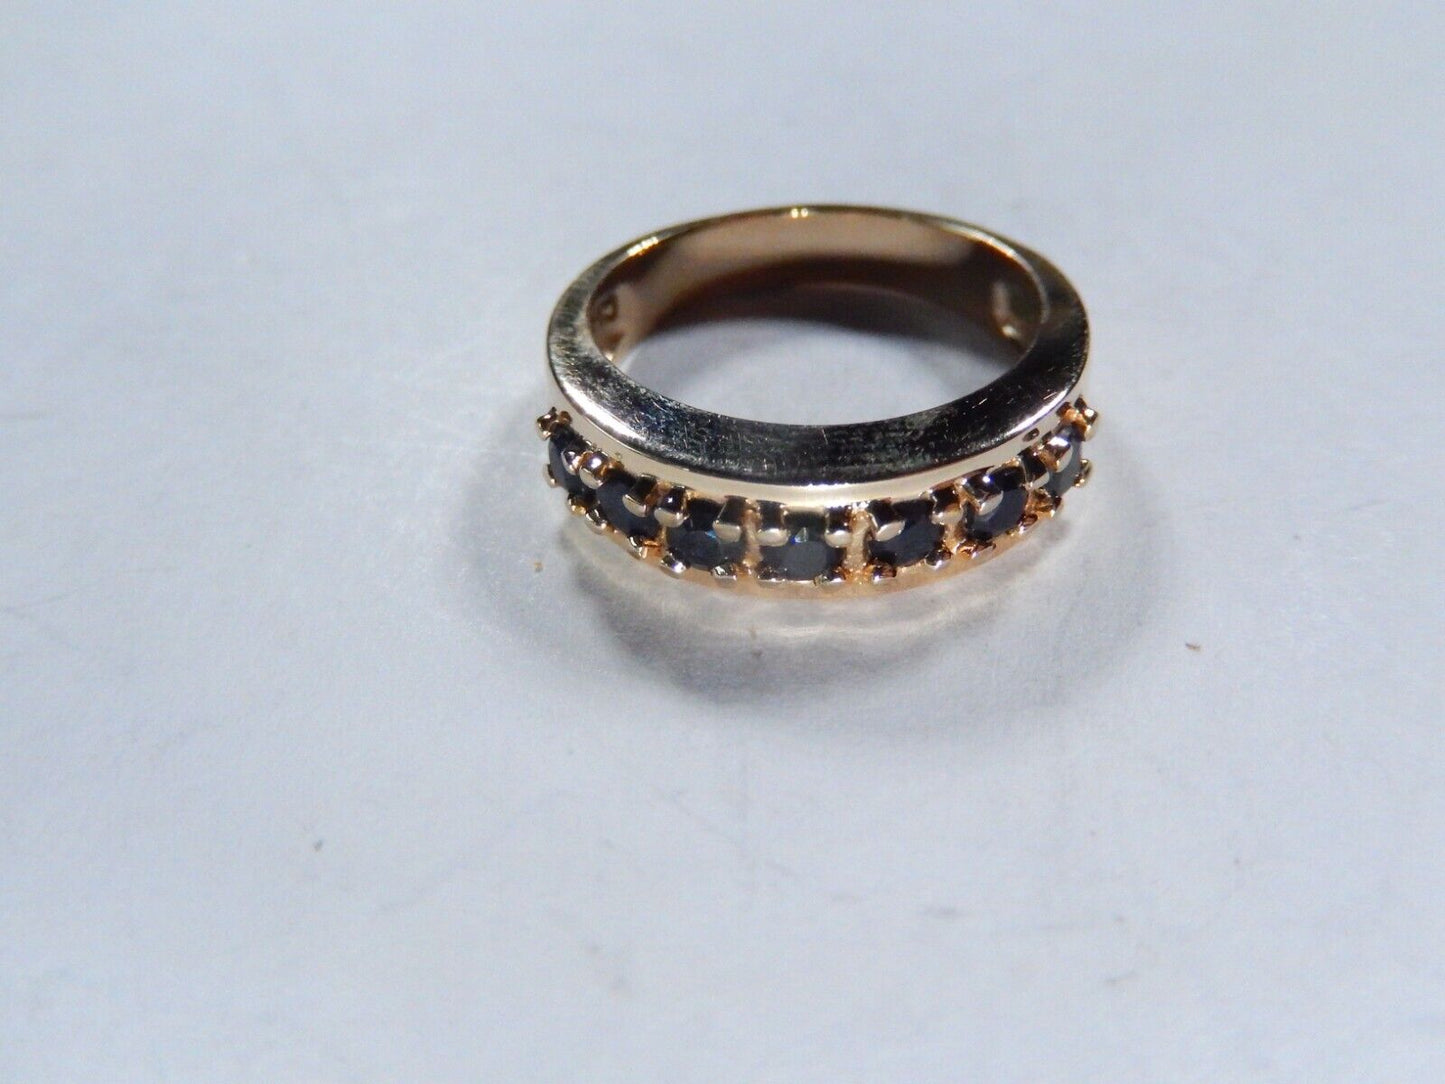 ROSS SIMONS VINTAGE VERMEIL STERLING SILVER SAPPHIRE 5.5 mm BAND RING Size 7